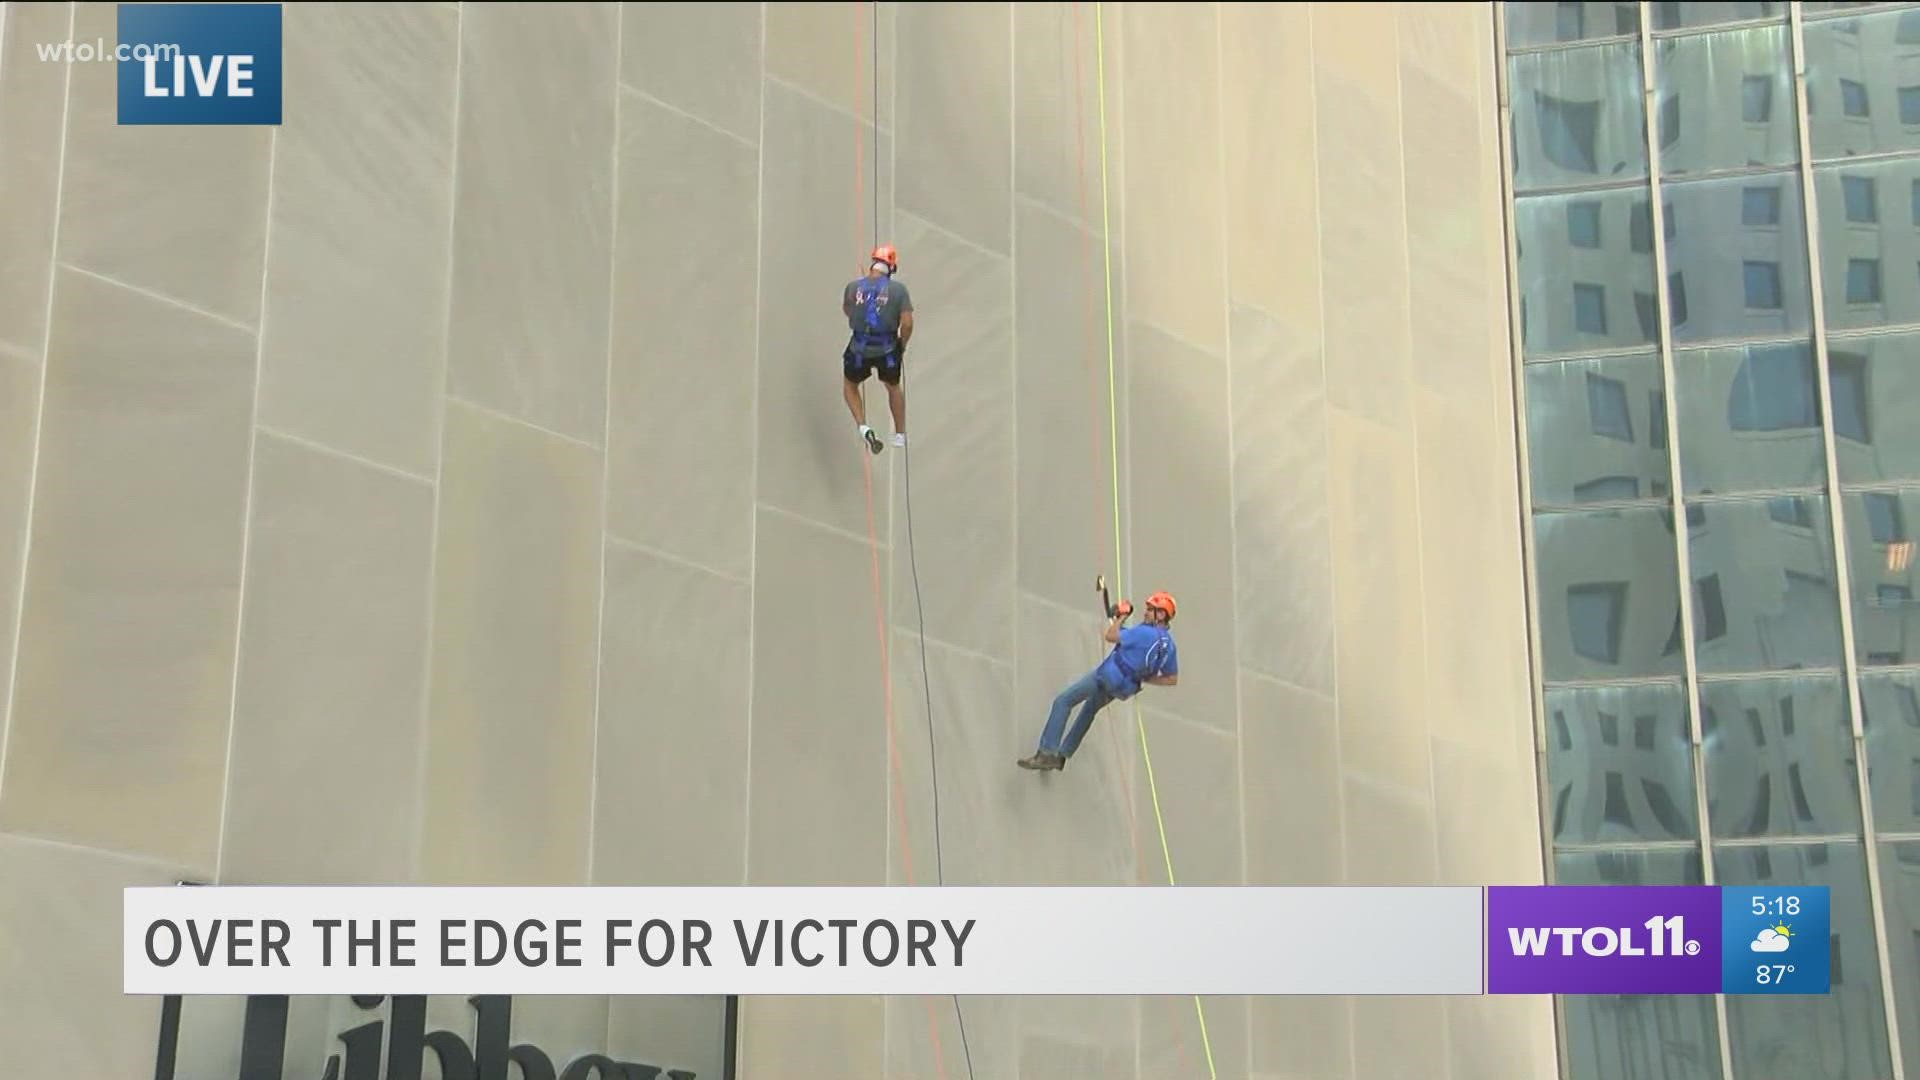 Come out to 300 Madison Ave. to cheer the rappellers who raised money to benefit The Victory Center's mission to aid cancer patients and survivors.